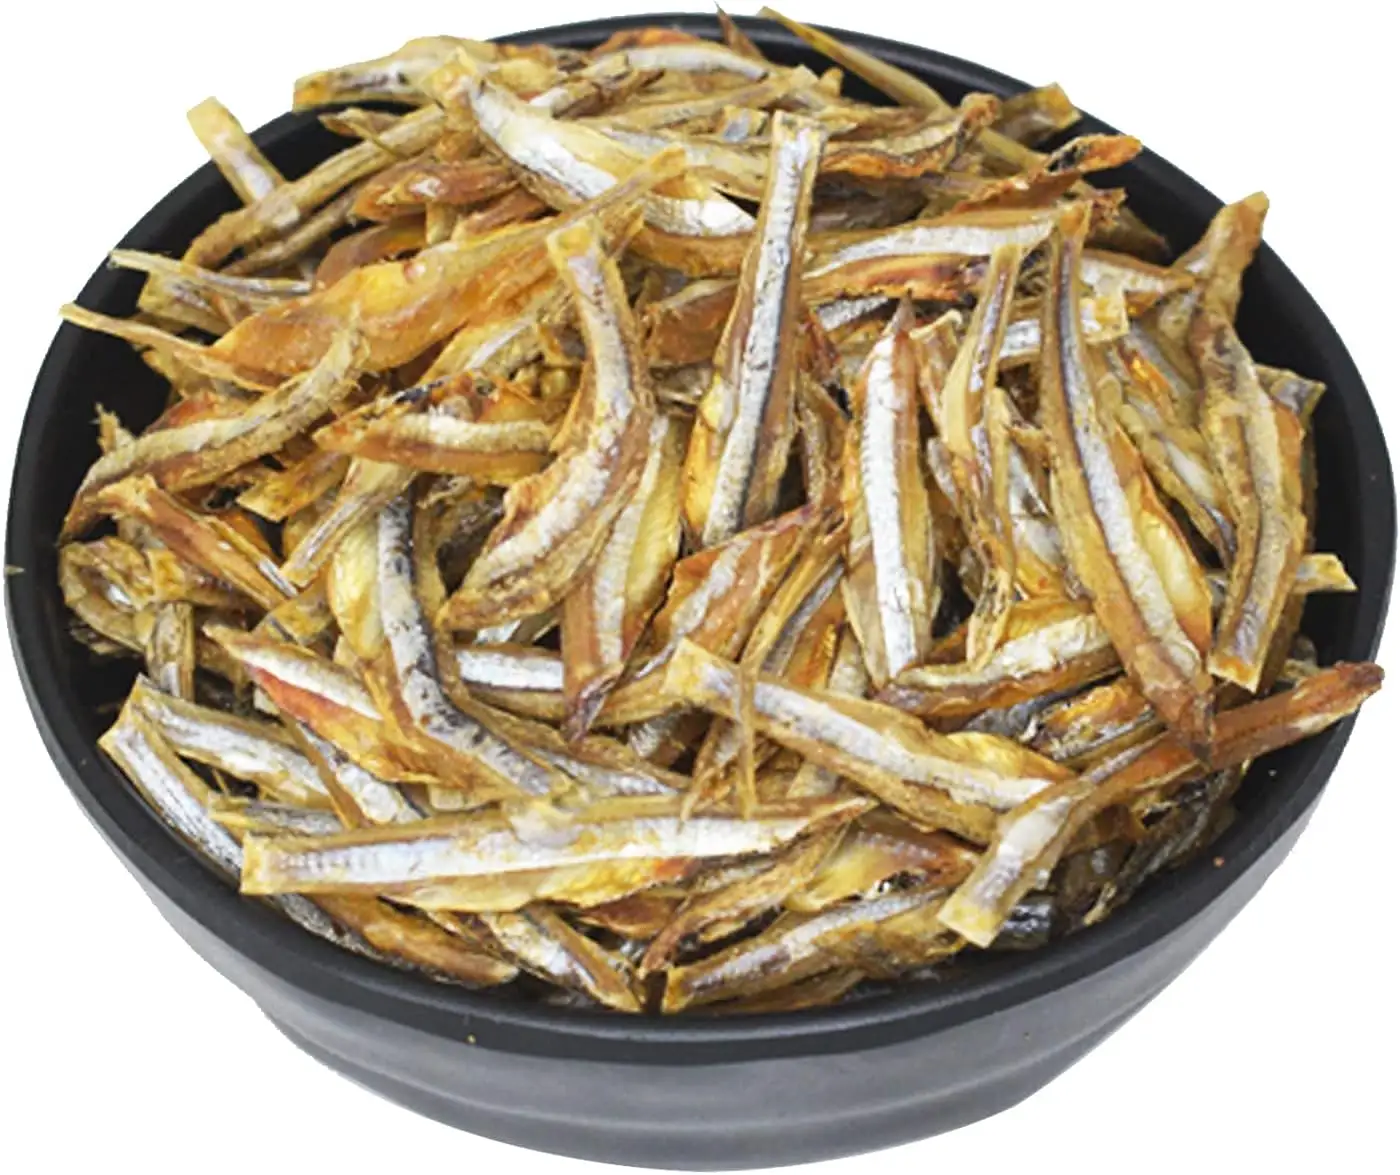 BEST VALUE DRIED ANCHOVY FROM VIETNAM HOT PRICE DRIED ANCHOVY FISH TASTE SMALL FISH WITH MANY SIZE TOM